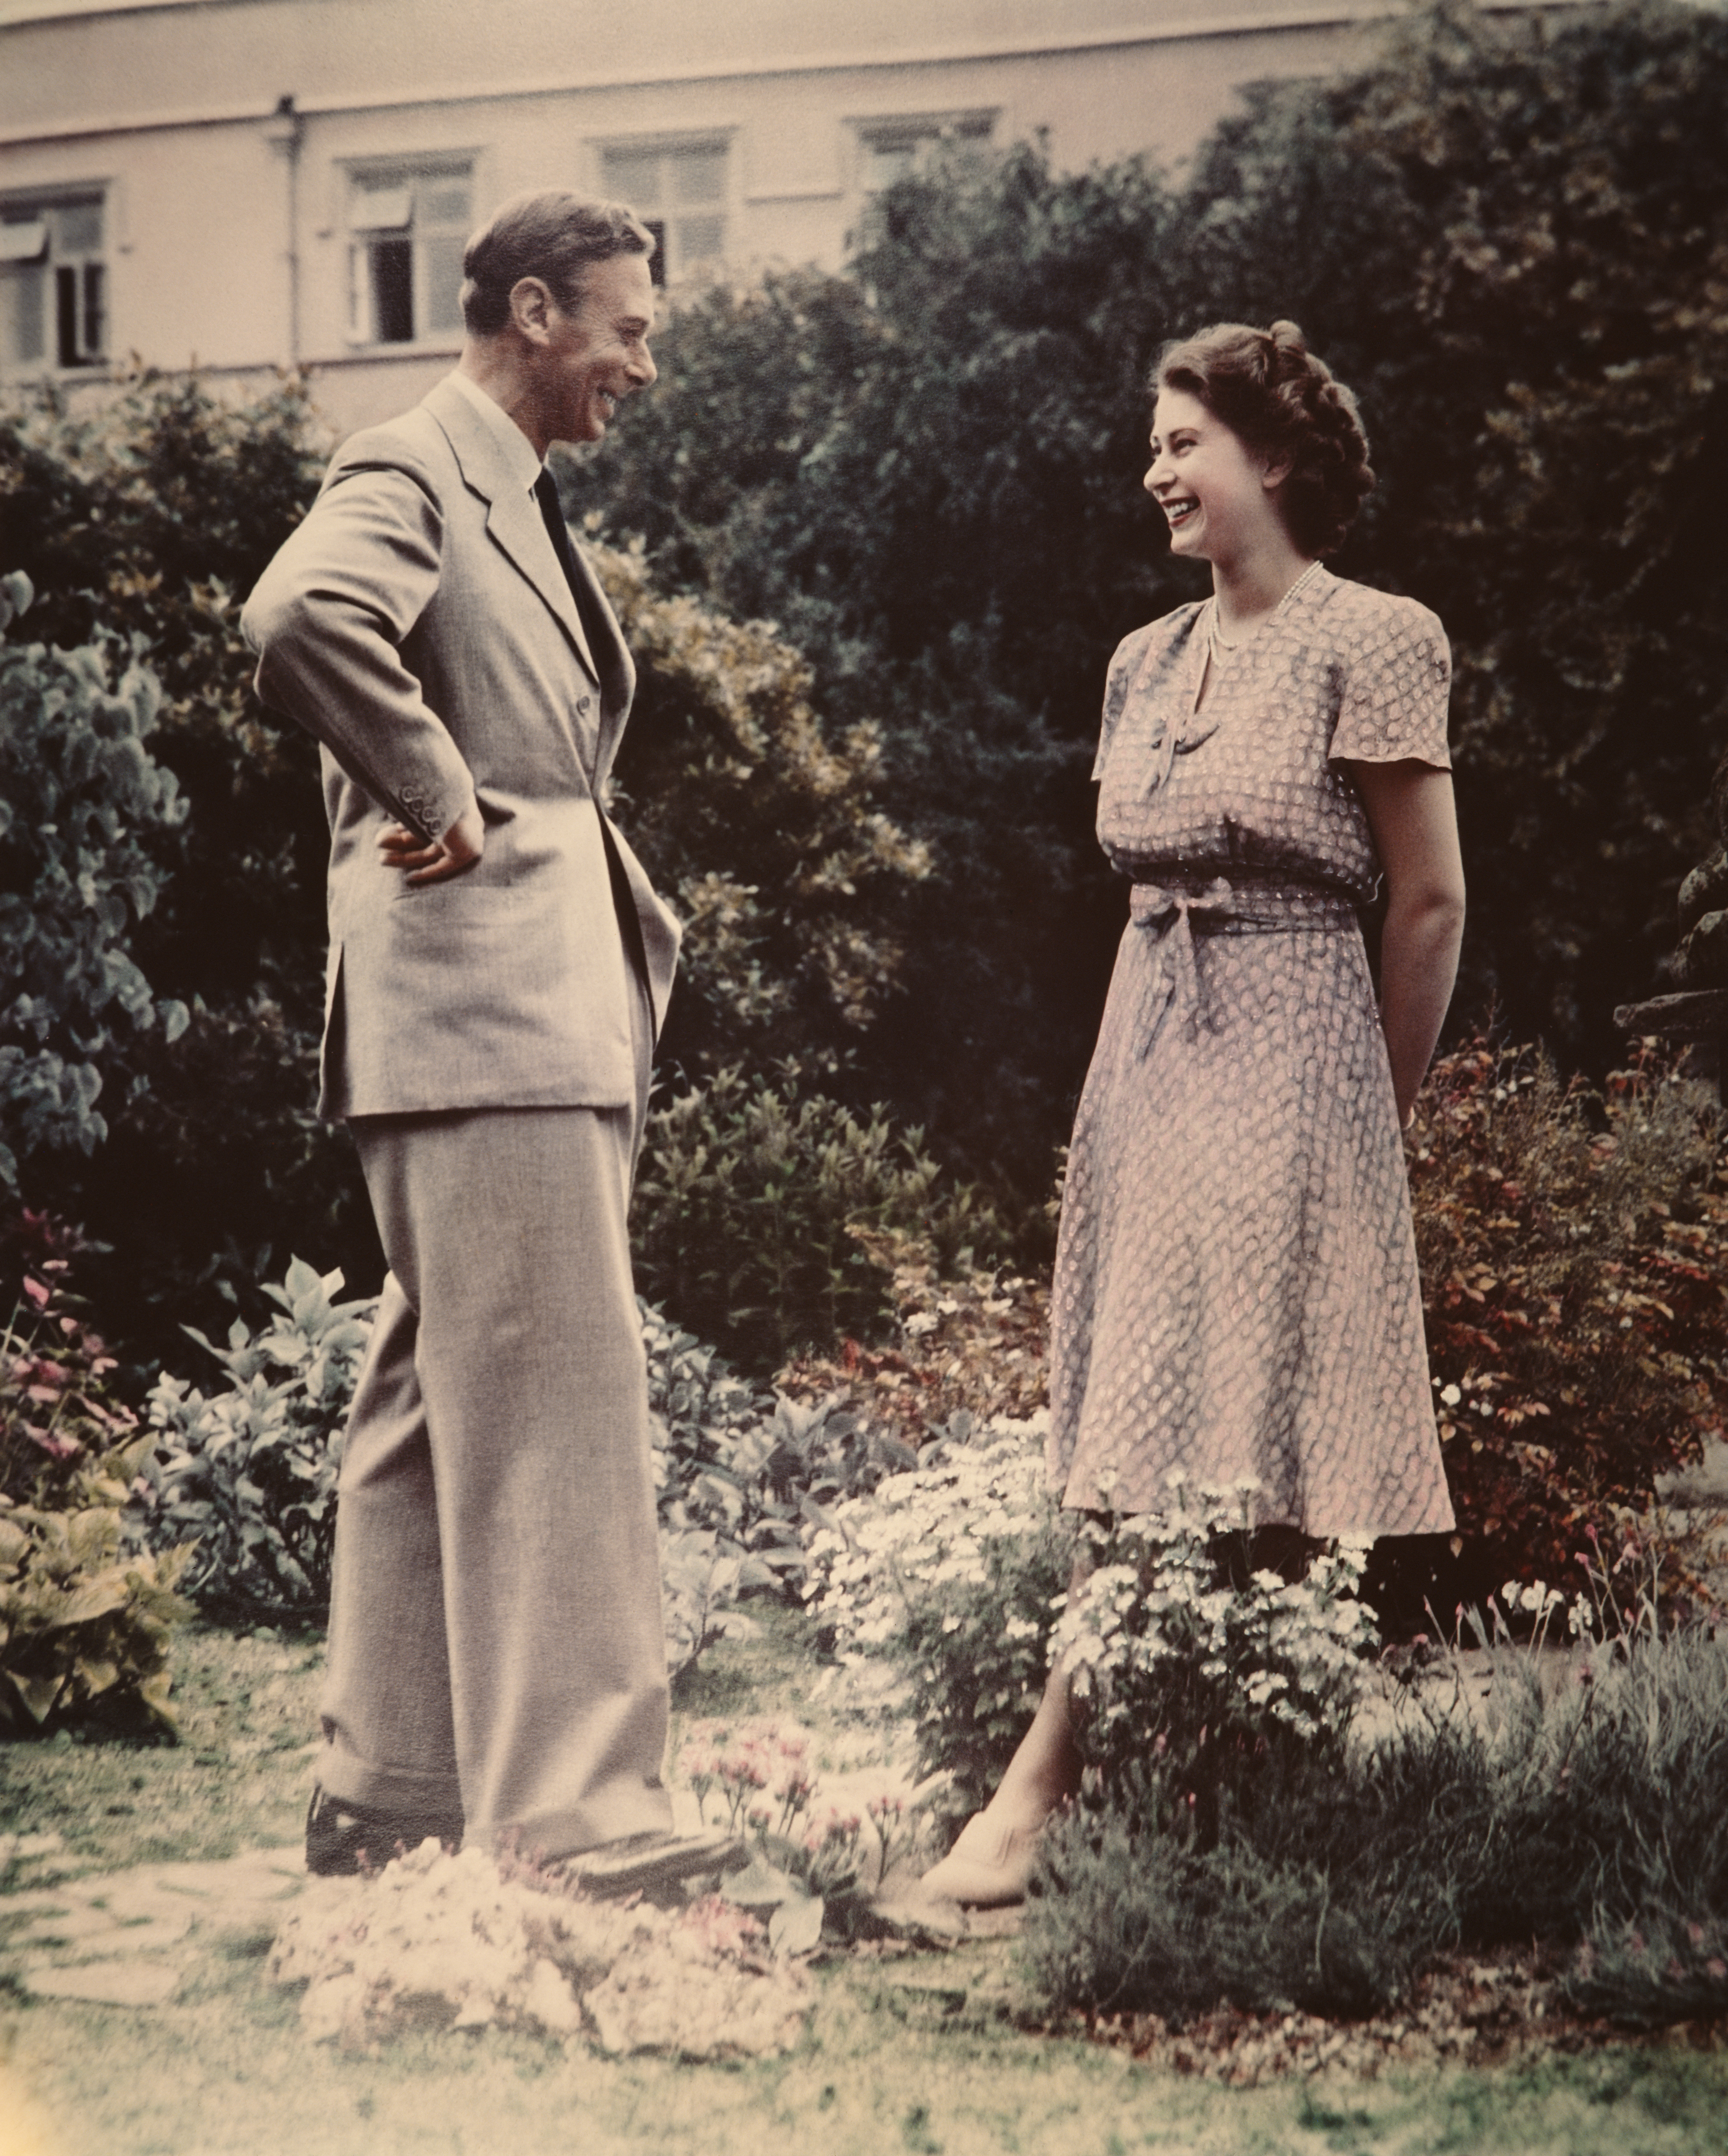 King George VI and Princess Elizabeth photographed in a garden on July 8, 1946 | Source: Getty Images